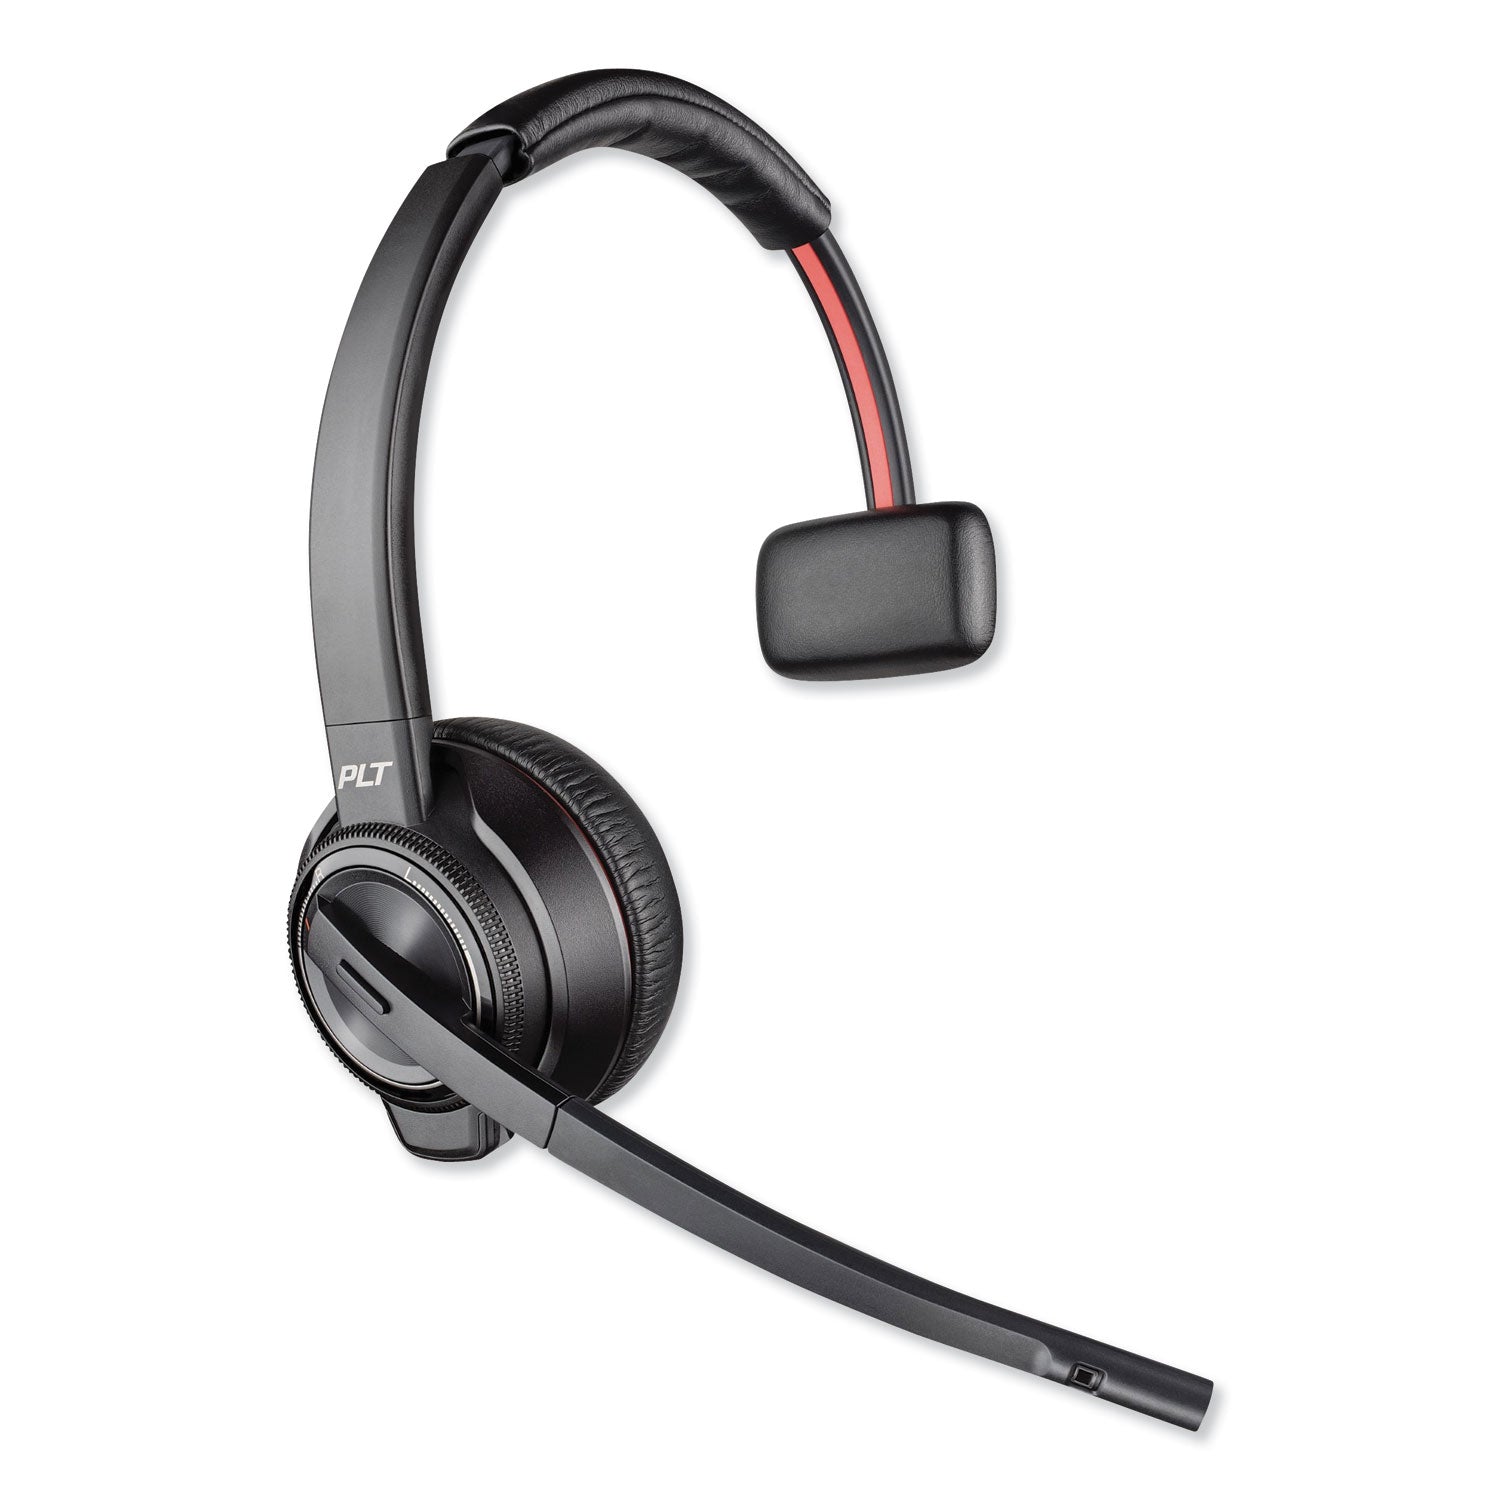 Plantronics Savi Wireless Headset System - Mono - Wireless - Bluetooth/DECT 6.0 - 590 ft - 20 Hz - 20 kHz - Over-the-head - Monaural - Noise Cancelling Microphone - Noise Canceling - Black - 2